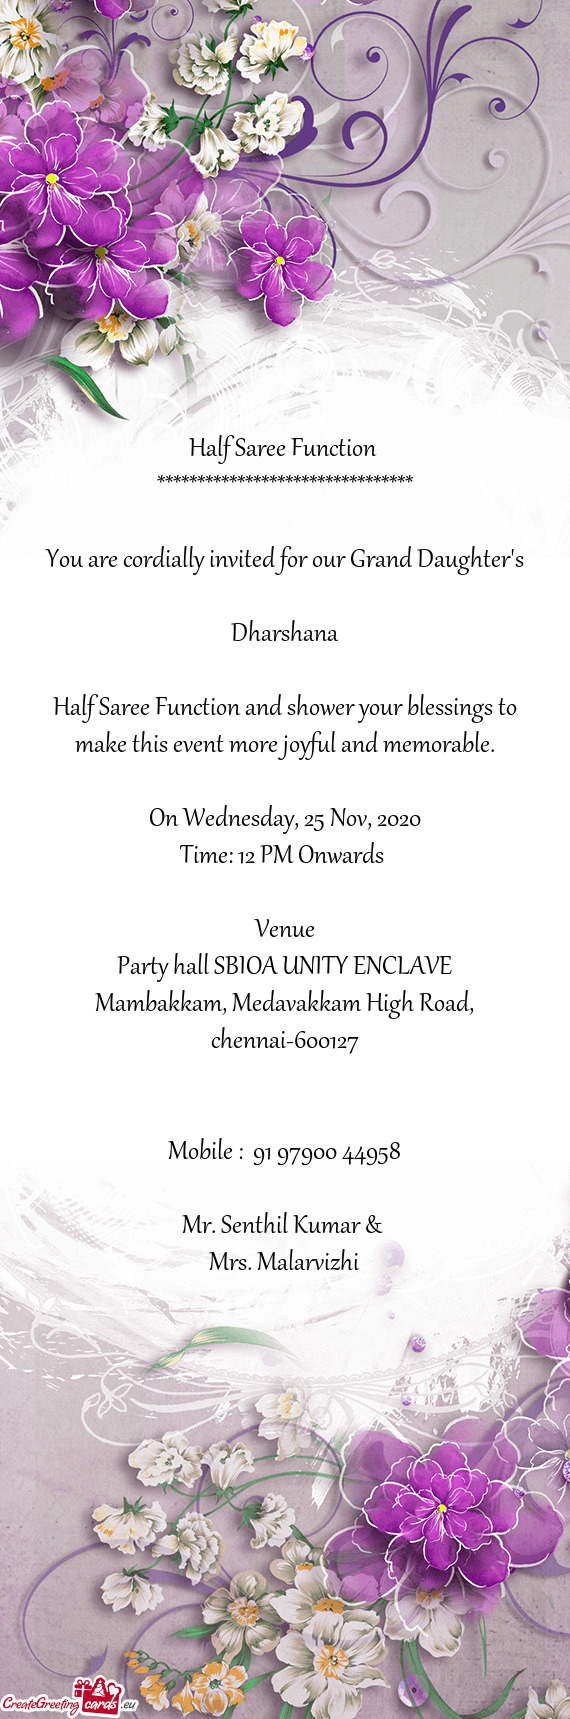 You are cordially invited for our Grand Daughter